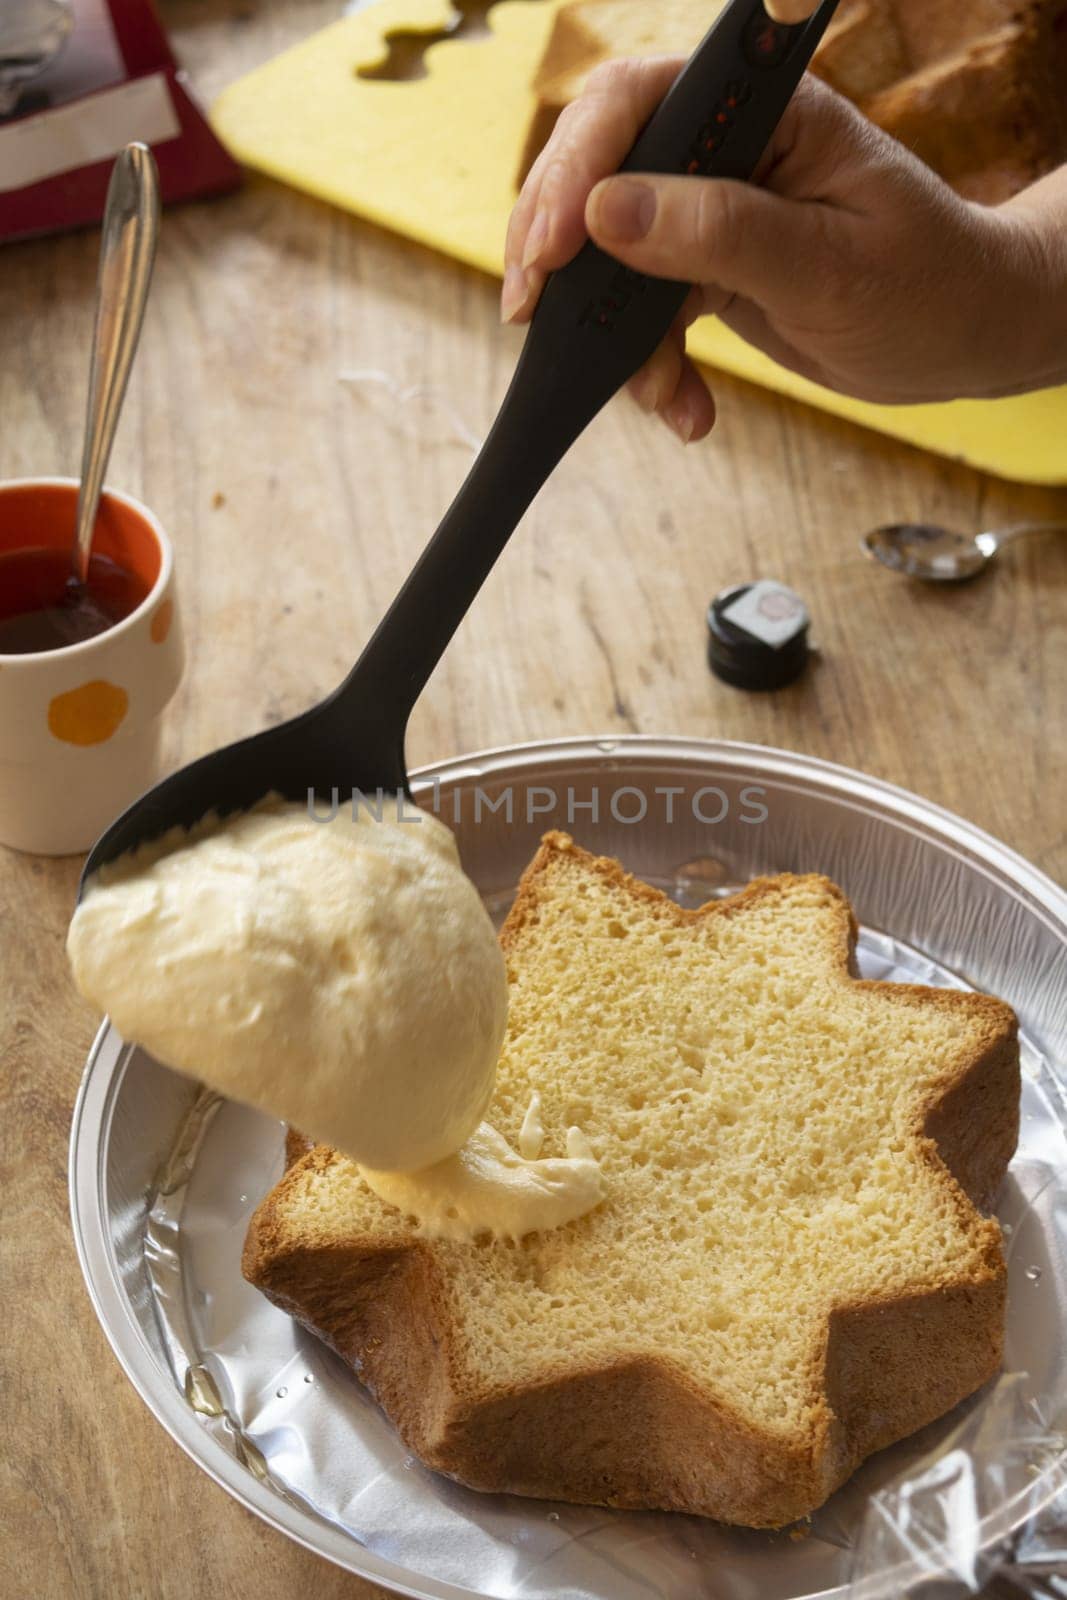 preparation of a cream-filled dessert with as base a sponge cake